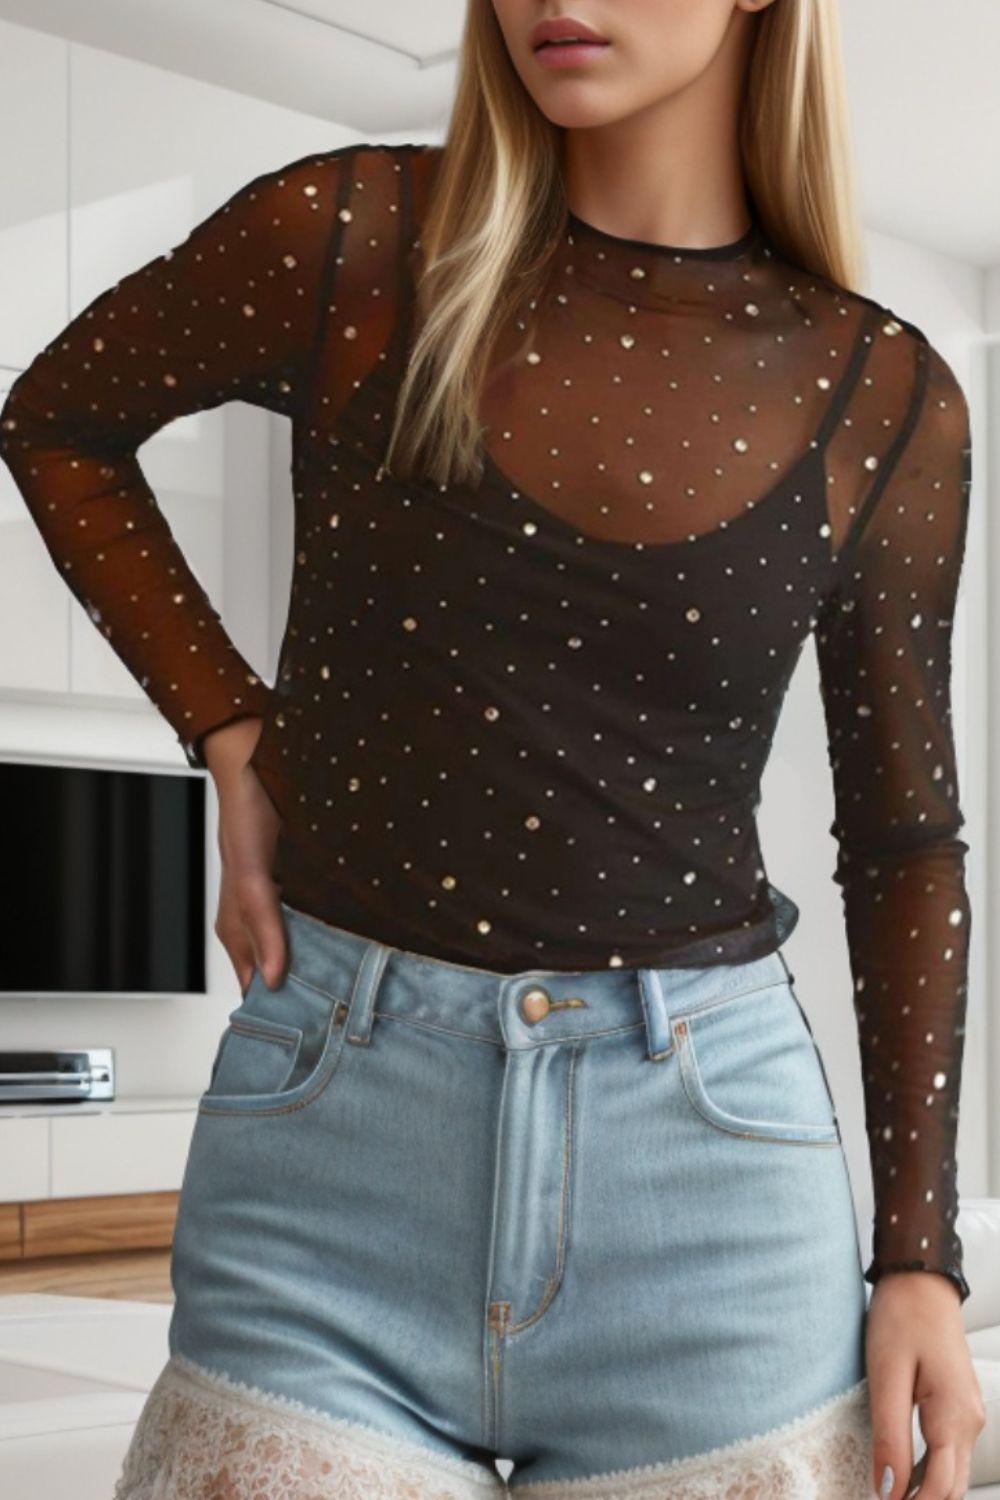 a woman wearing a sheer top and shorts